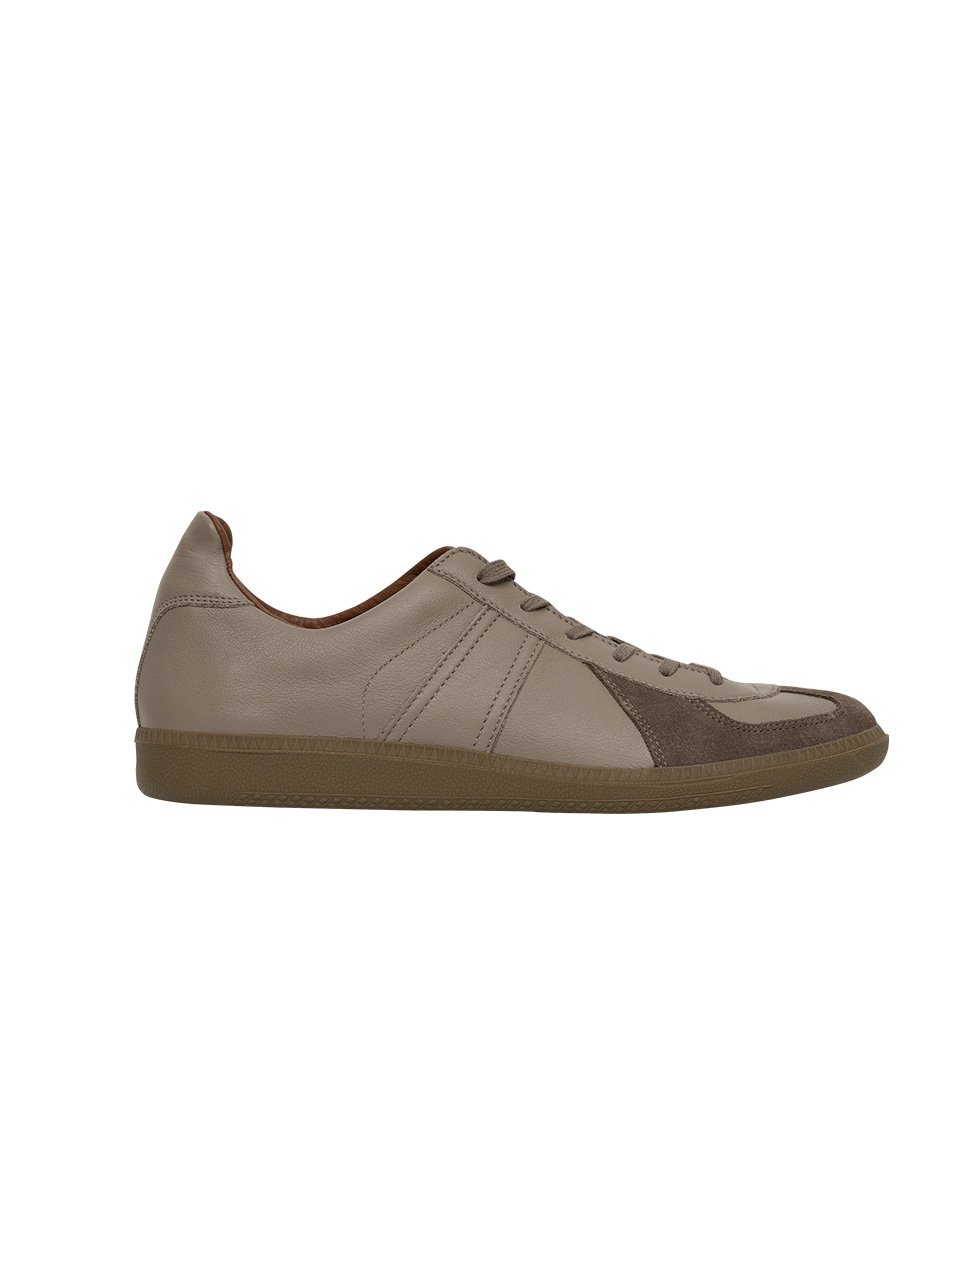 REPRODUCTION OF FOUND - GERMAN MILITARY TRAINER 1700L (BEIGE KHAKI)